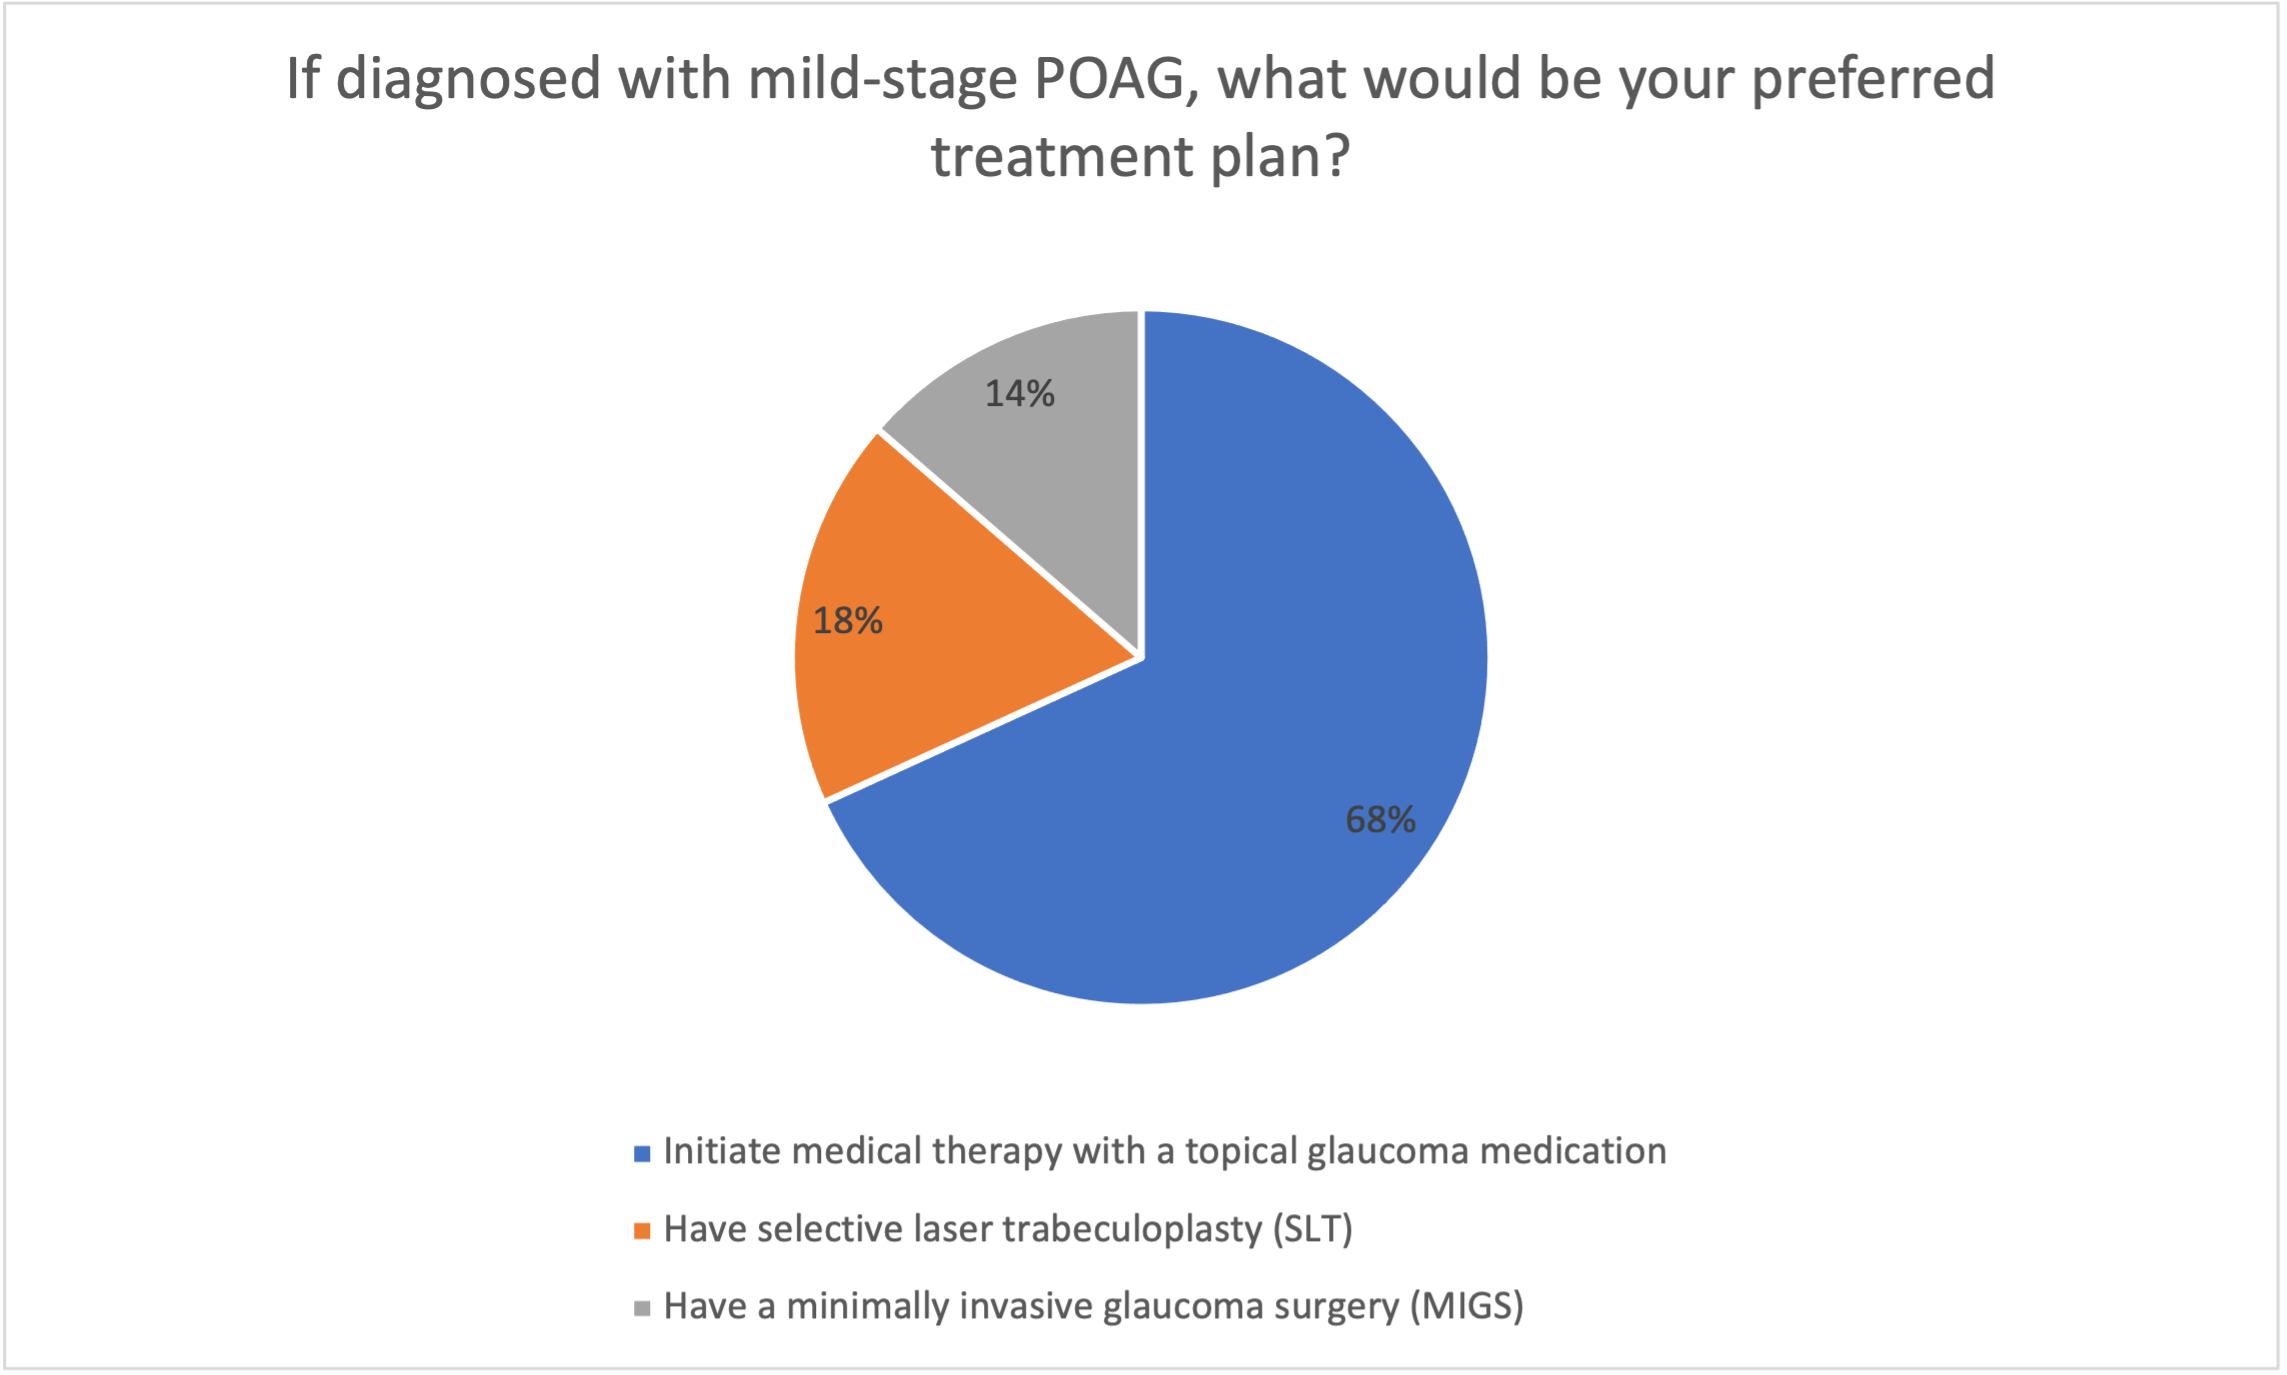 Poll results: Preferred treatment plans for mild-stage POAG